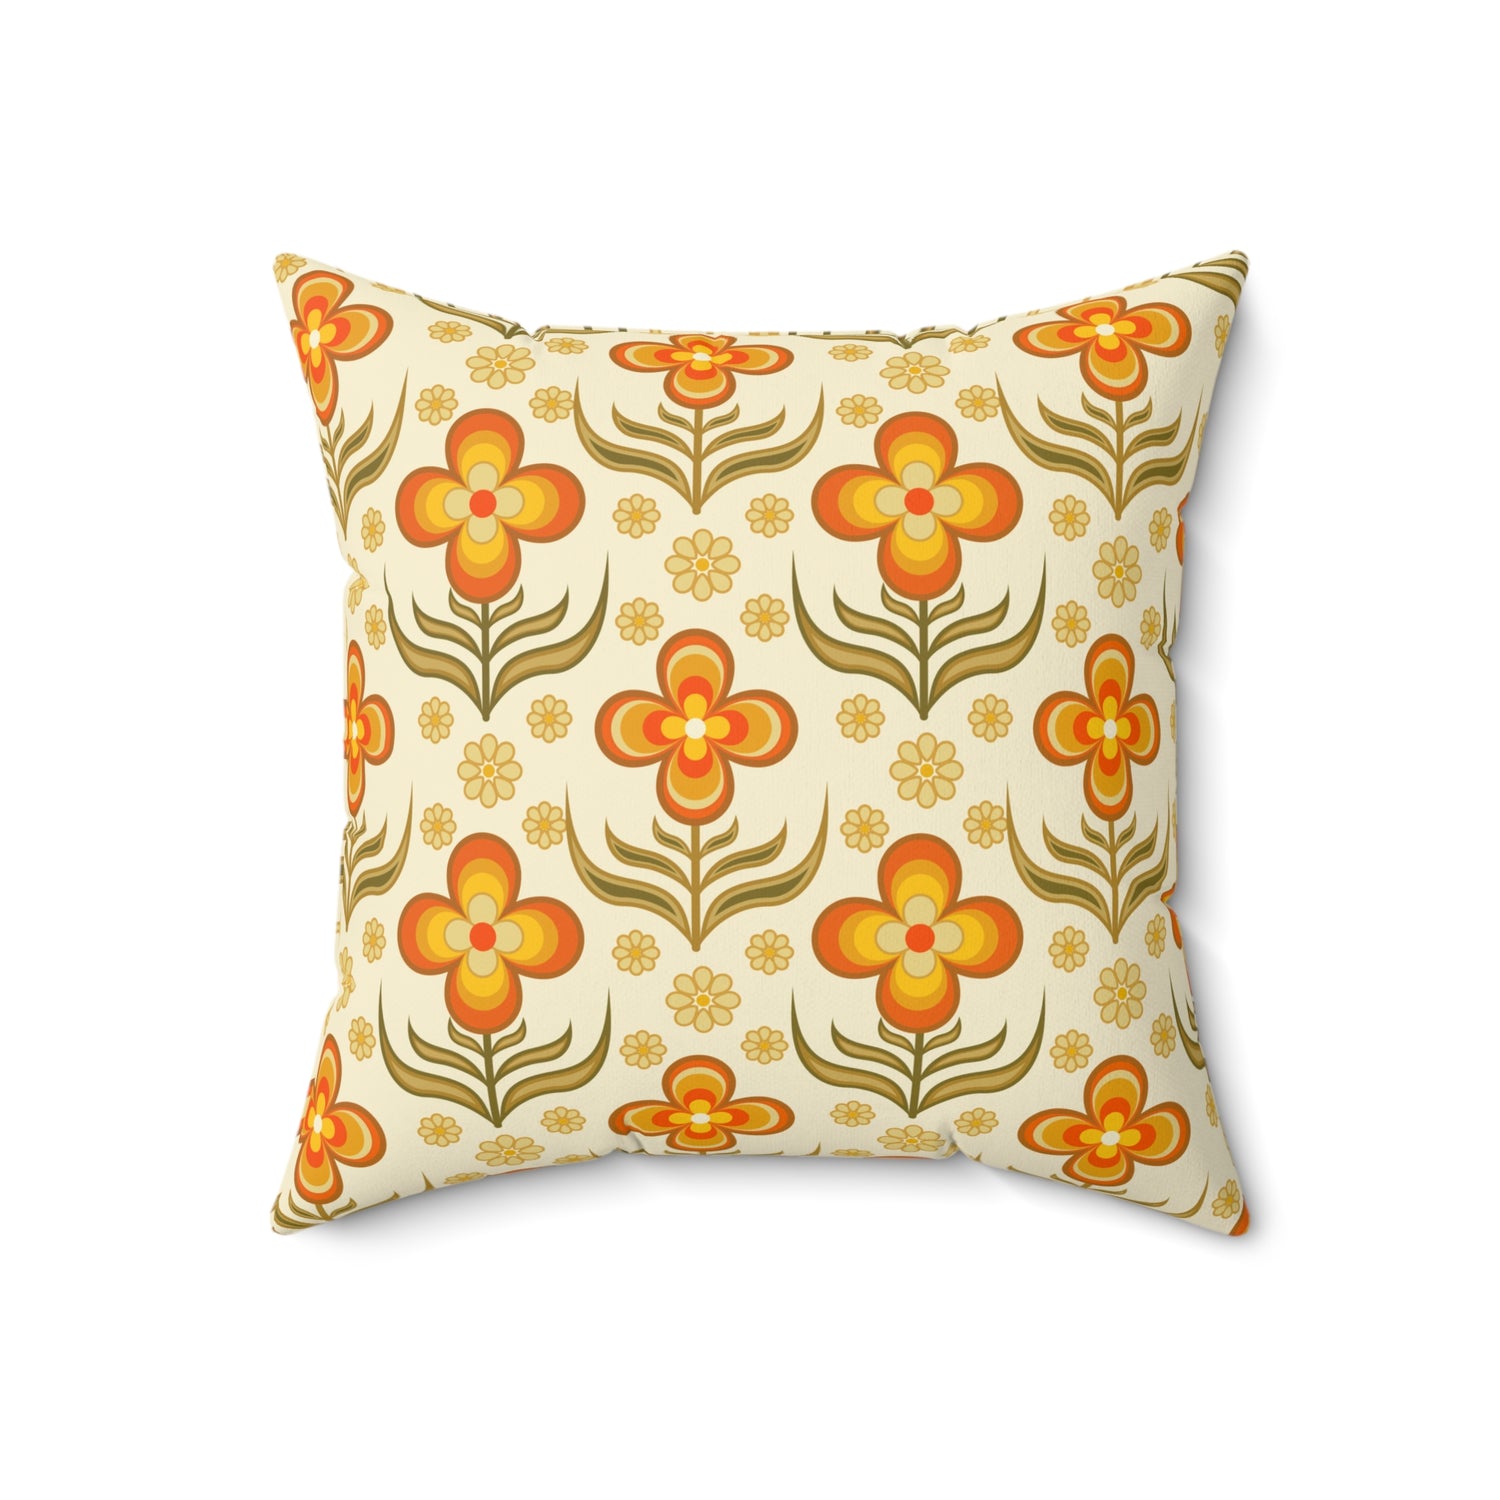 70s Retro Groovy Flower Power Floral Orange, Yellow Green Pillow And Cover